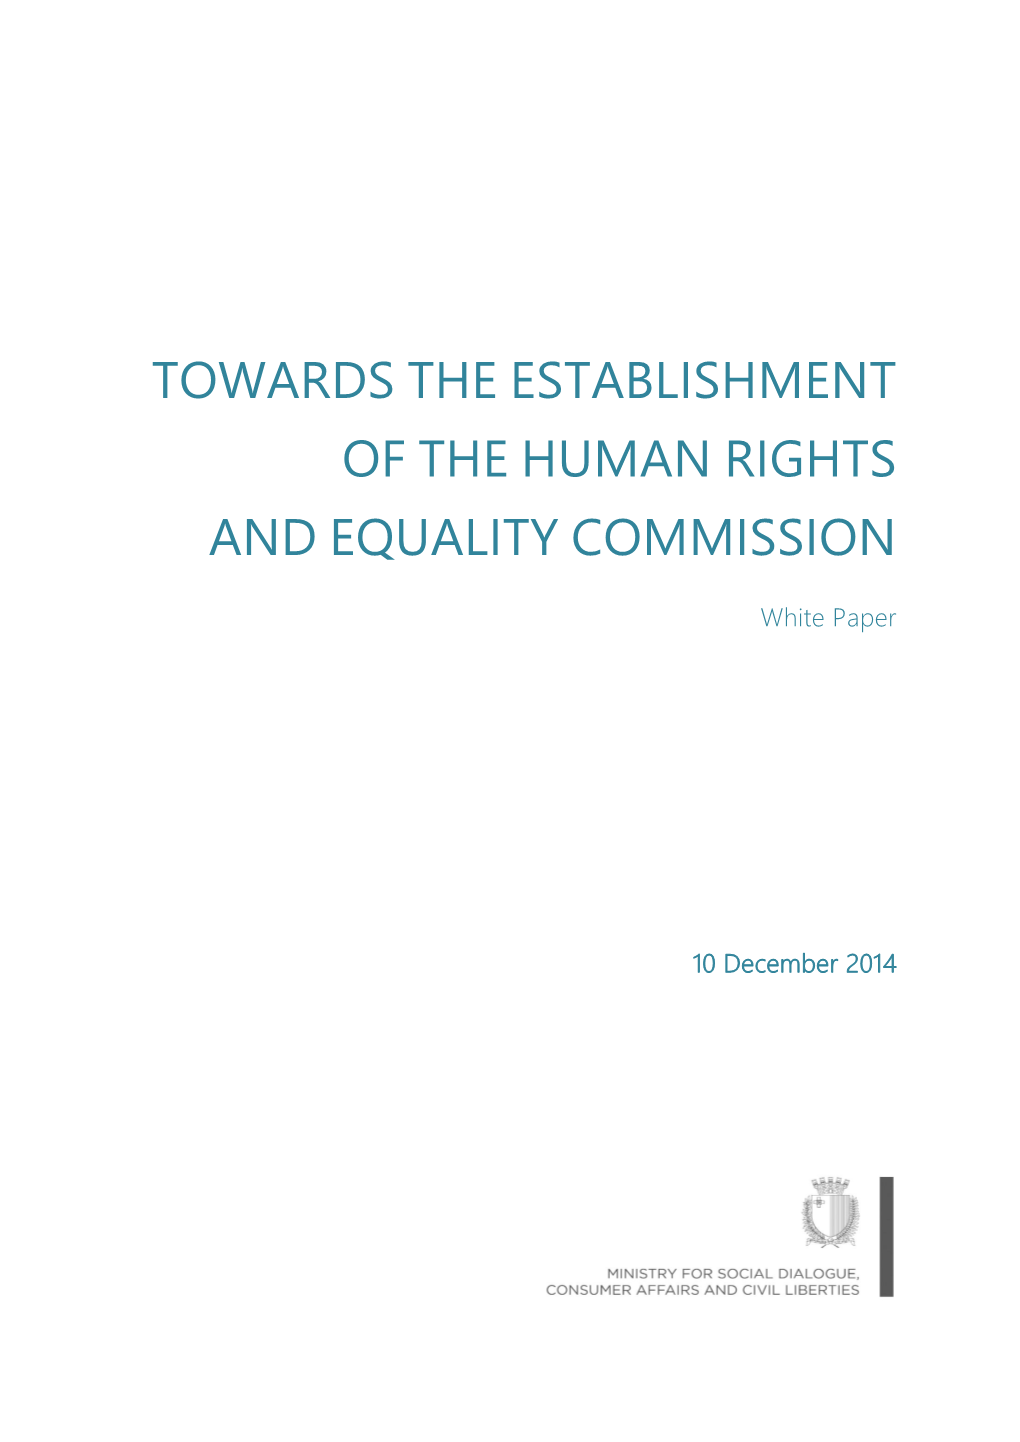 Towards the Establishment of the Human Rights and Equality Commission